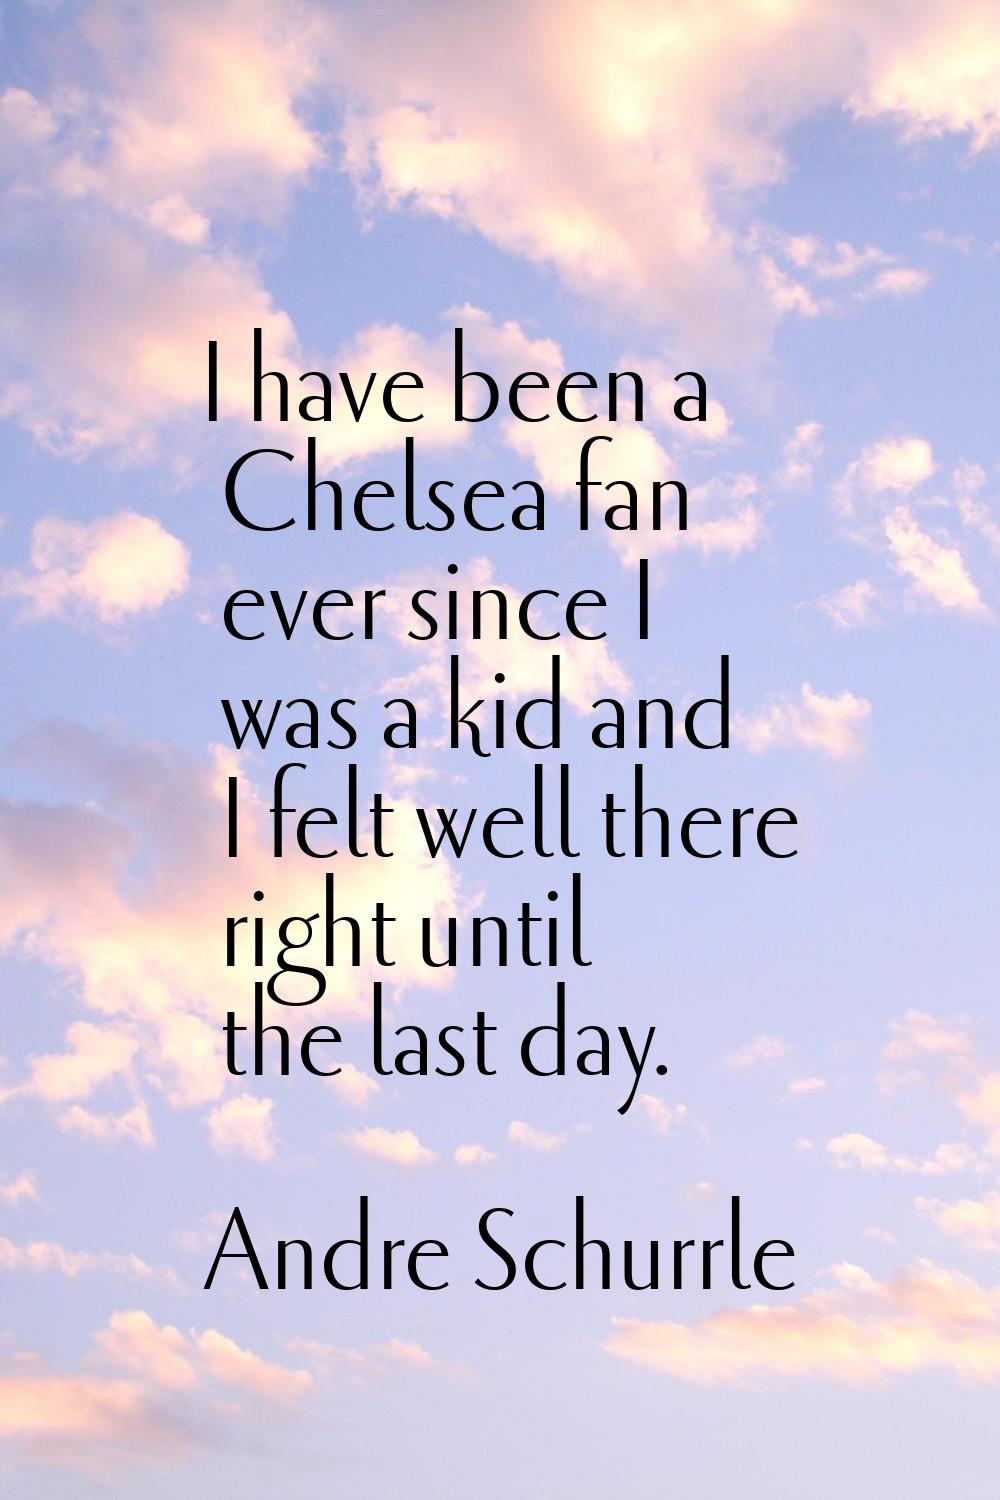 I have been a Chelsea fan ever since I was a kid and I felt well there right until the last day.